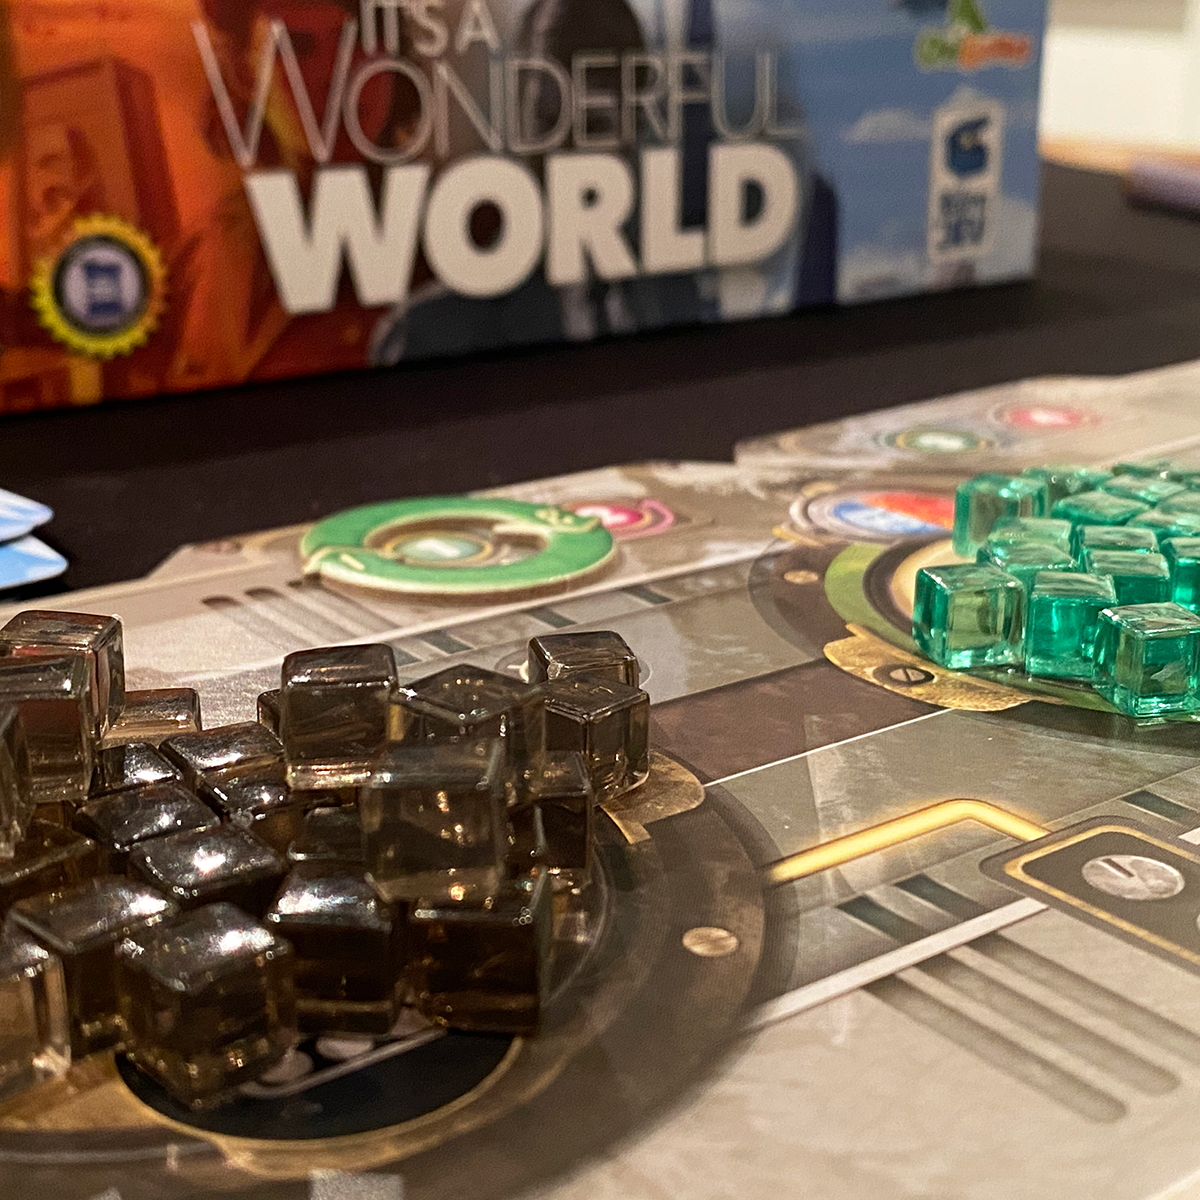 Buy It's a Wonderful World from Out of Town Games